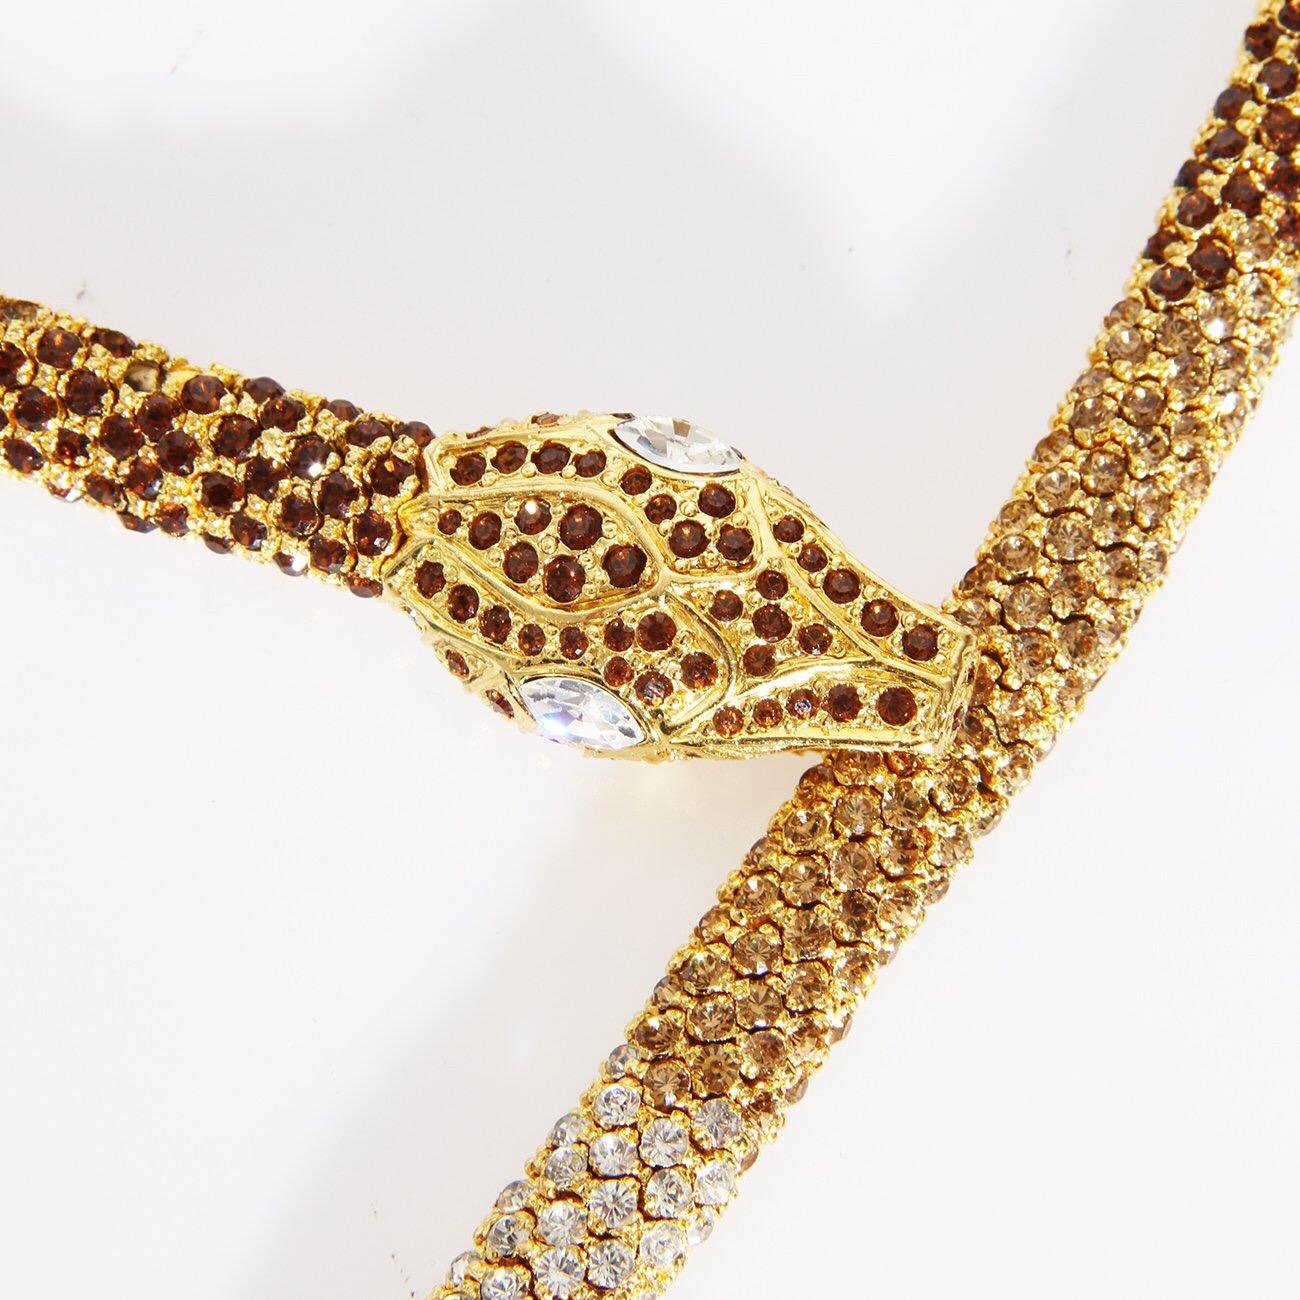 A stunning example of finely crafted costume jewelry from the historically significant 20th century Italian Haute Couture designer Valentino
Garavani. The coiled nature of the 24 karat  gold plated links with the painstakingly placed pavé Austrian